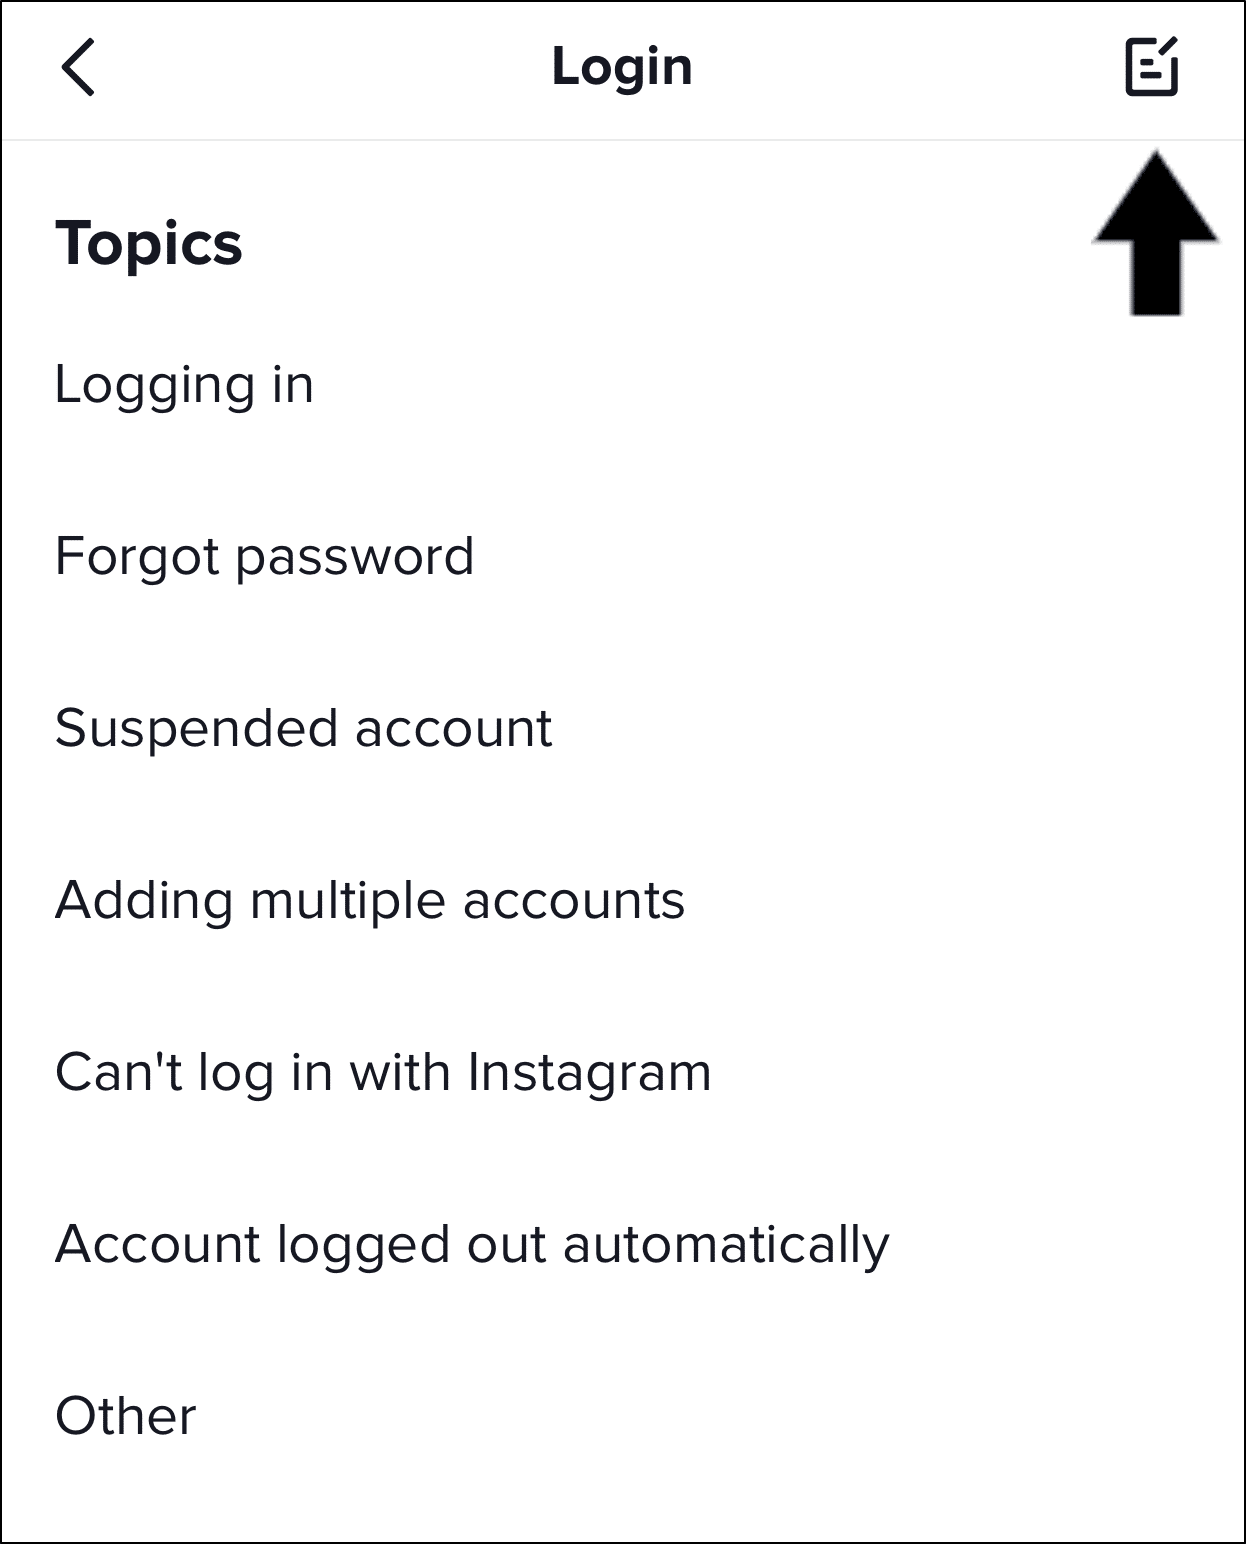 contact TikTok support by subitting feedback form to fix can't log in to TikTok, "Too many attempts, please try again" error message, or login failed